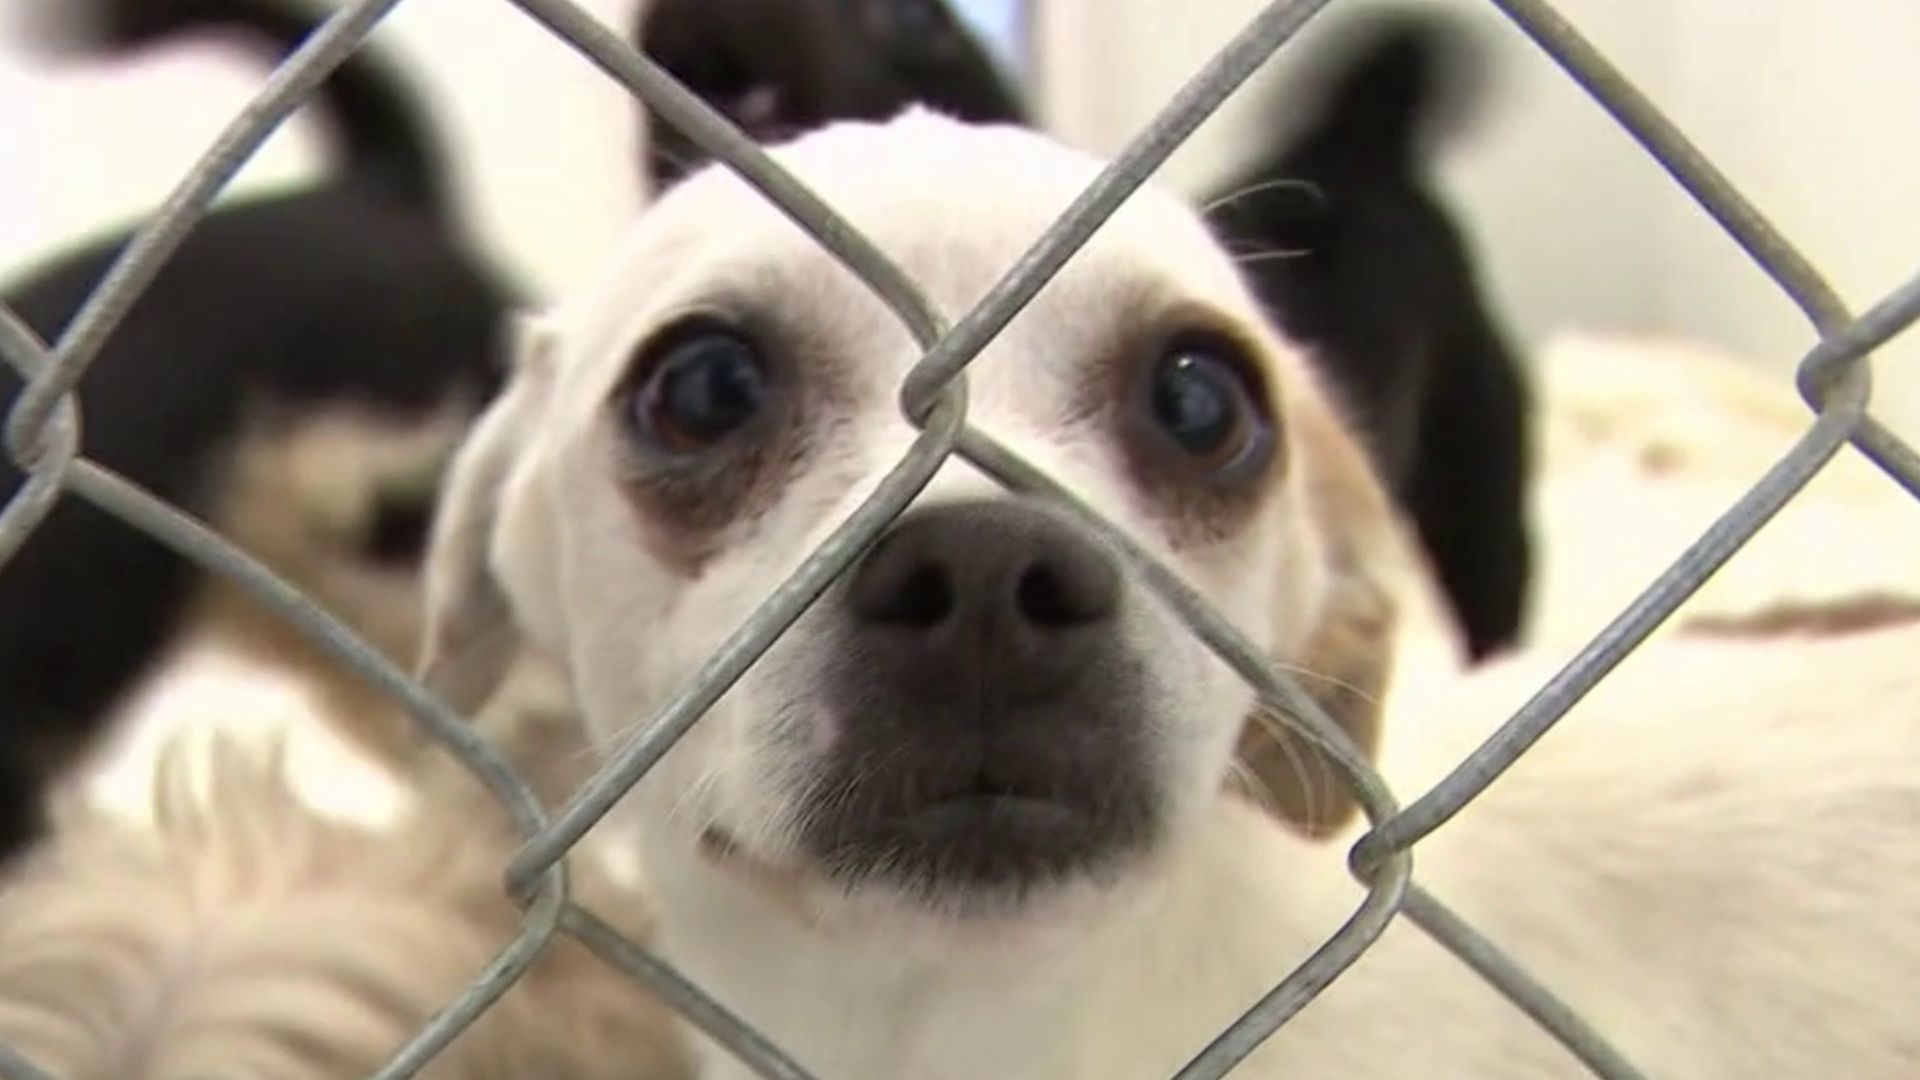 Shelter in danger of having to euthanize animals